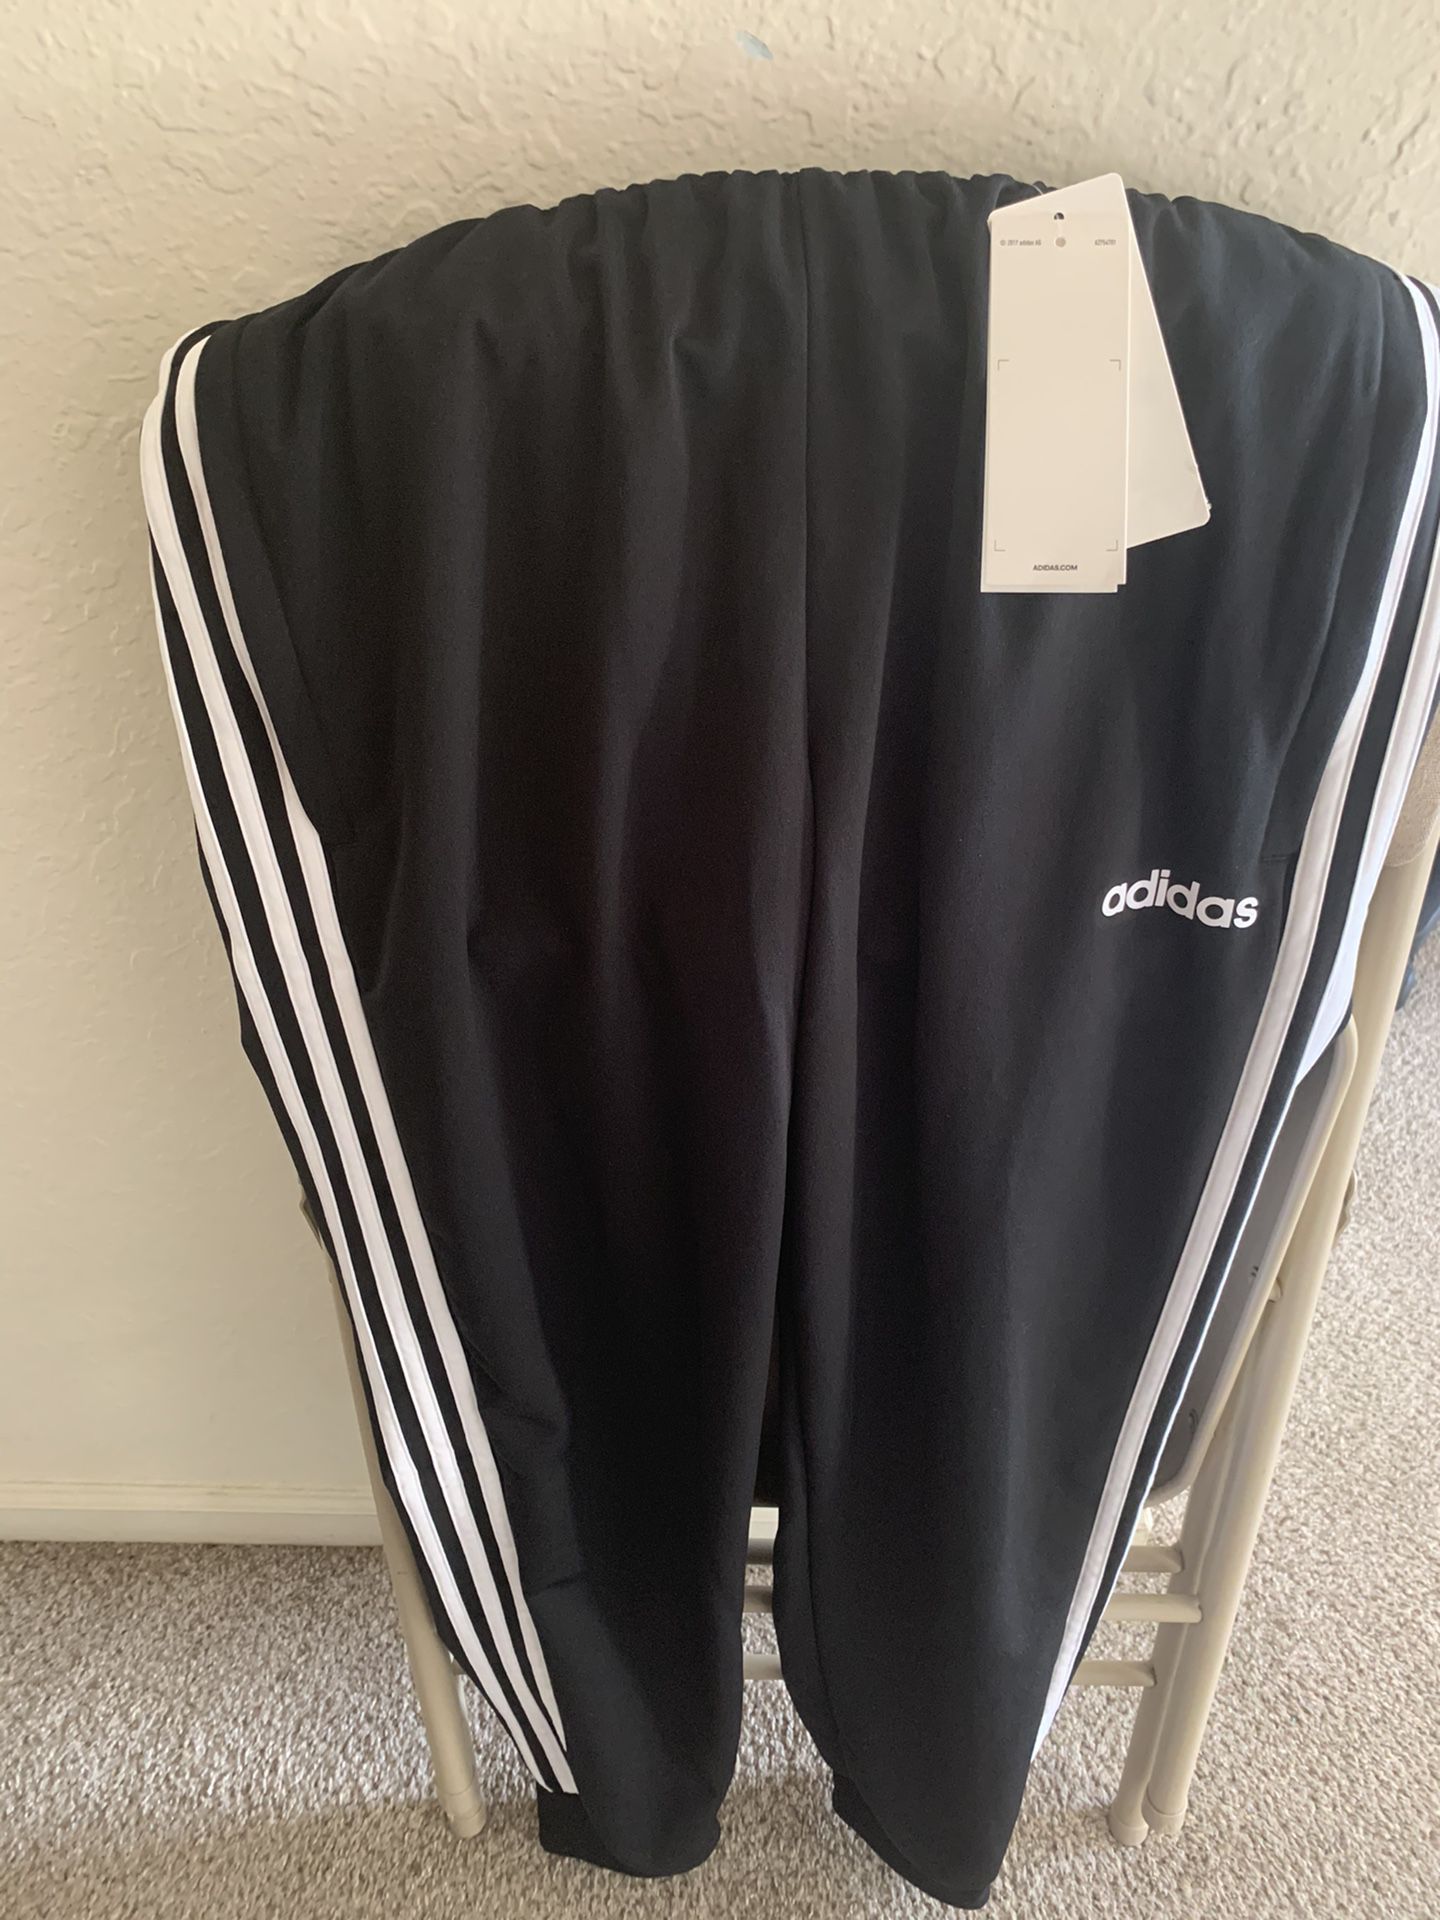 Brand new adidas pants size M color black never used